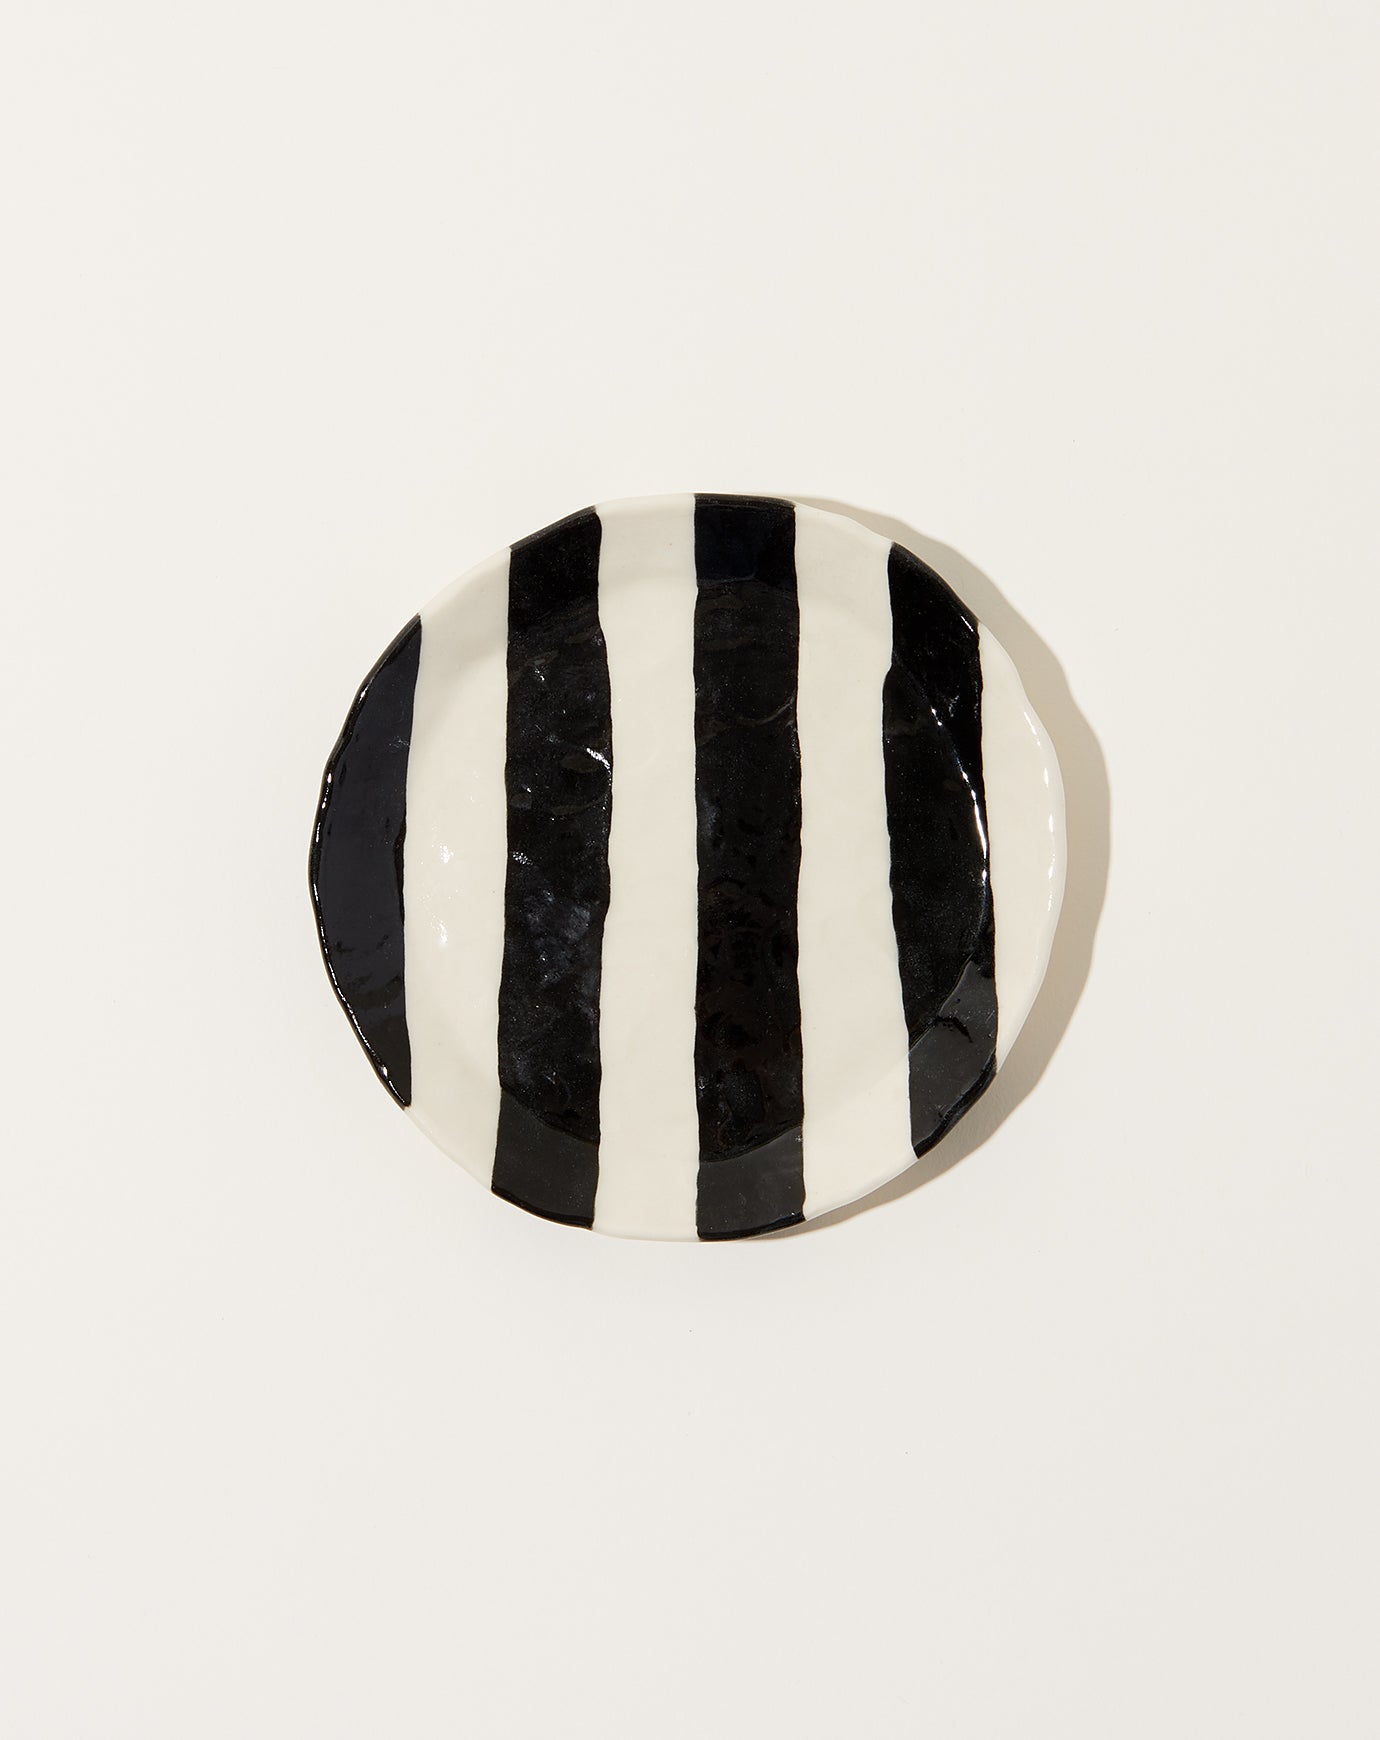 Isabel Halley Ribbon Plate in Black